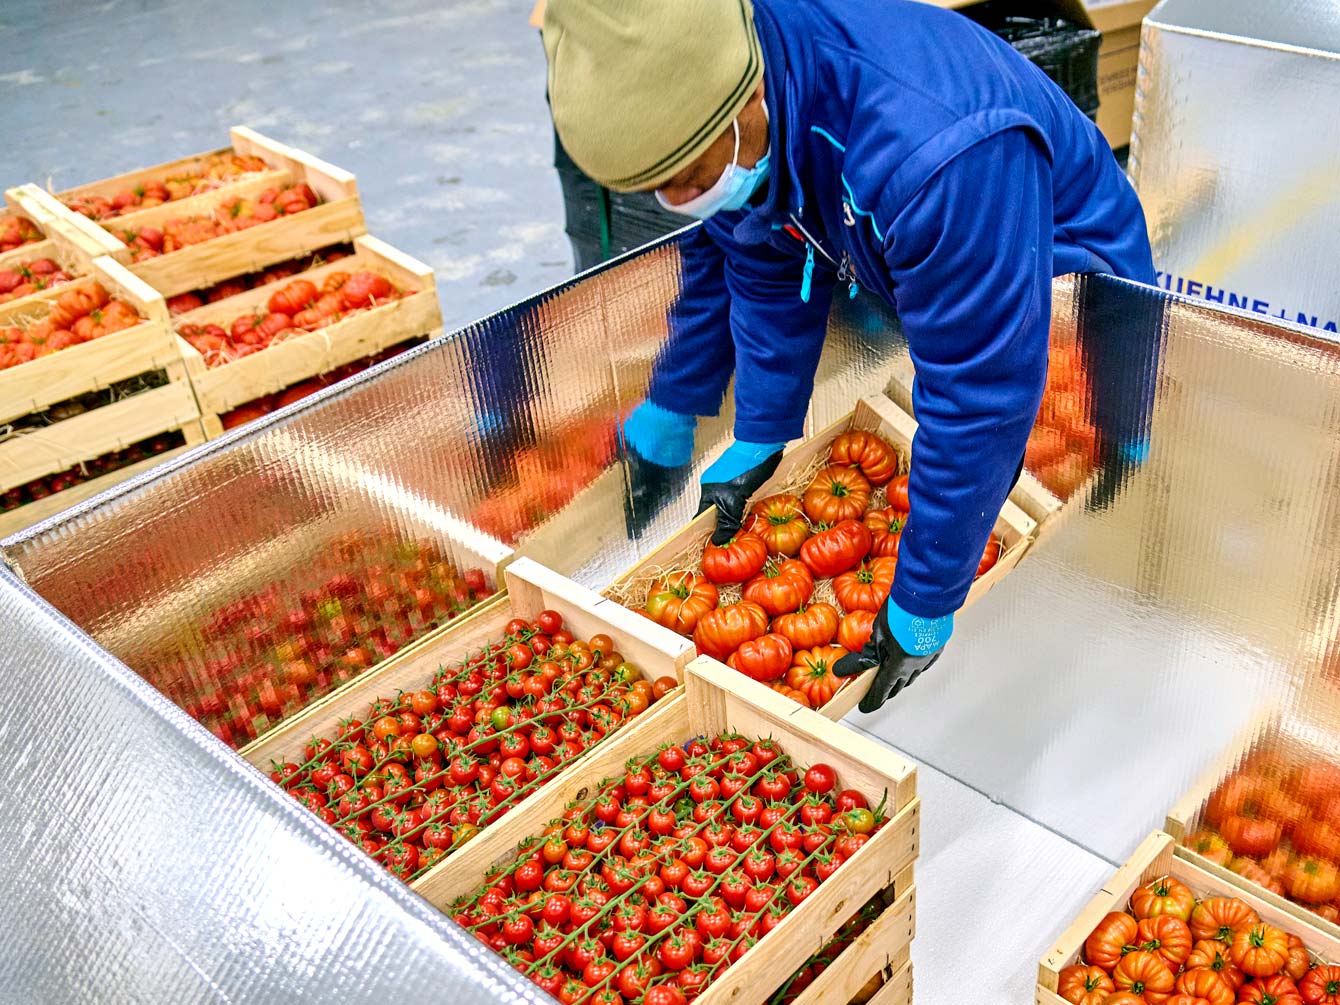 ProducePay Secures $38M Funding To Address Produce Supply Chain Waste